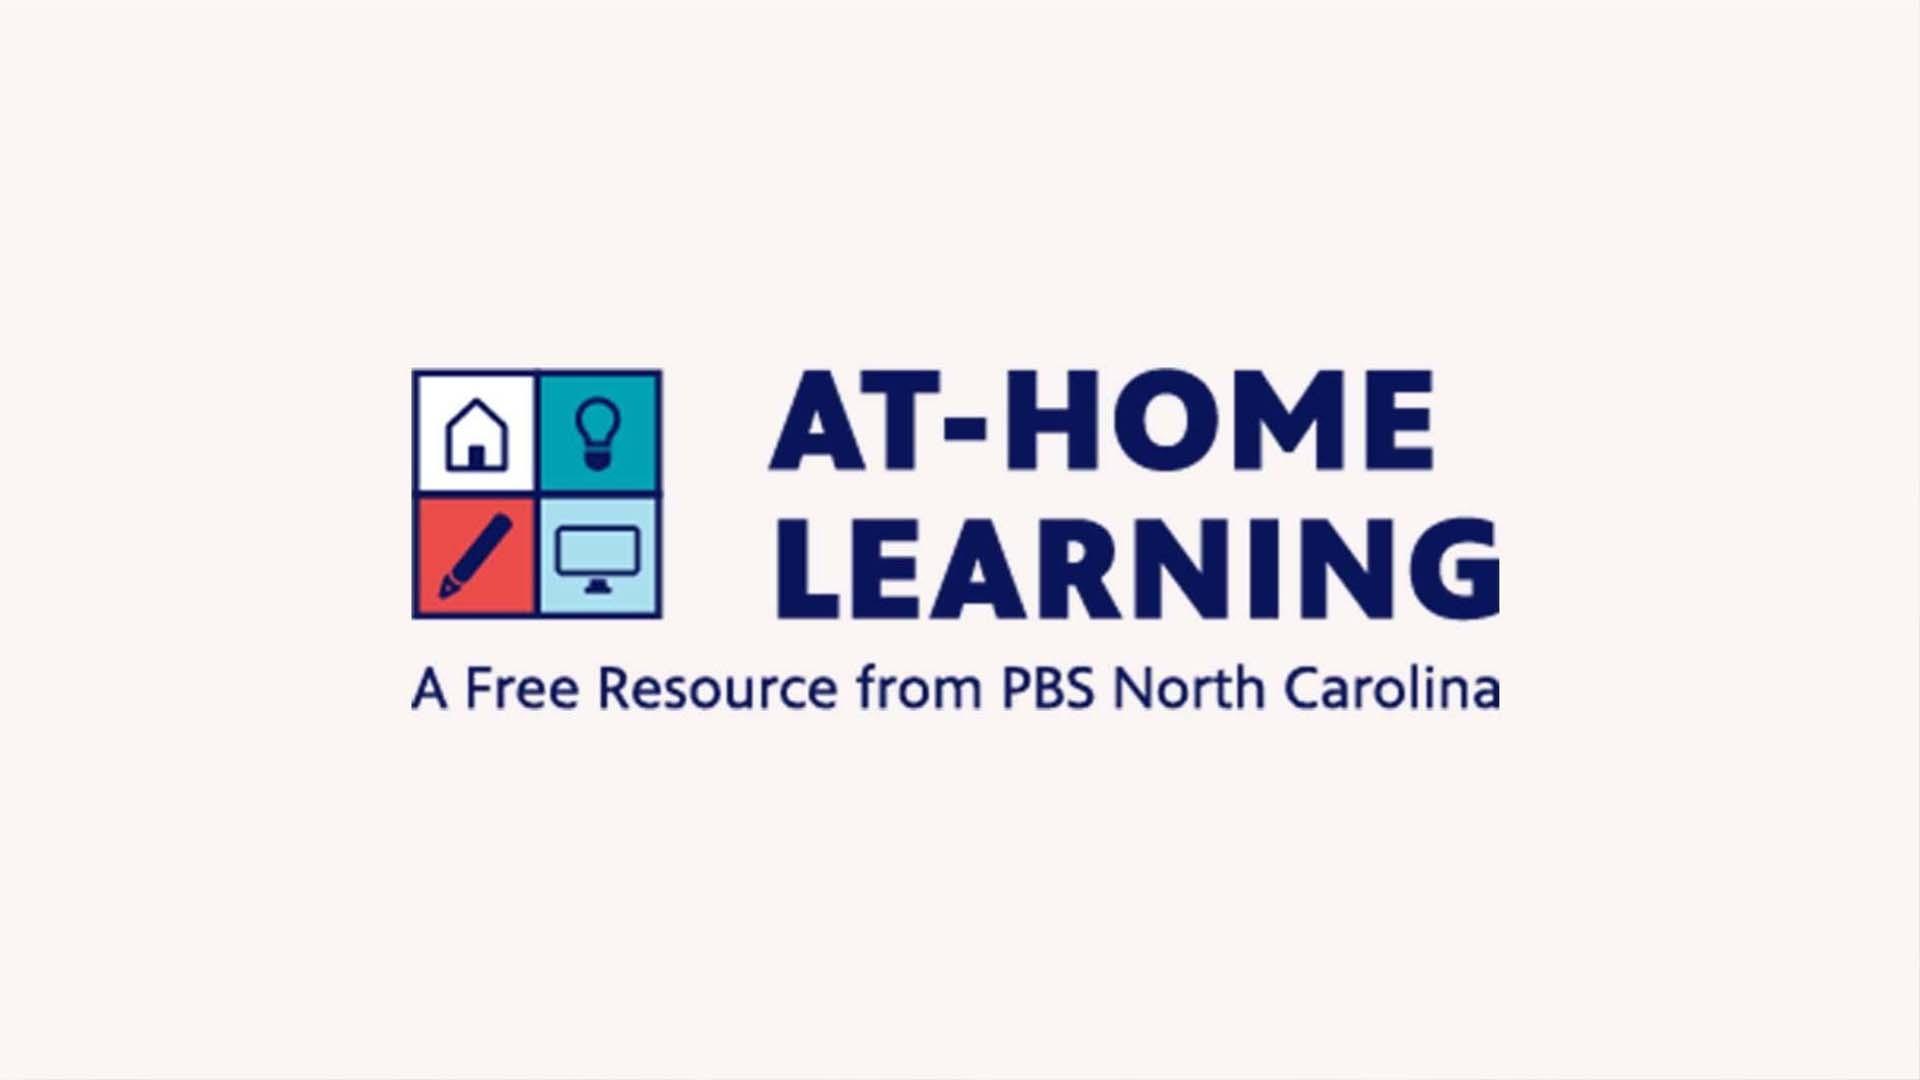 At home learning, a free resource from PBS North Carolina